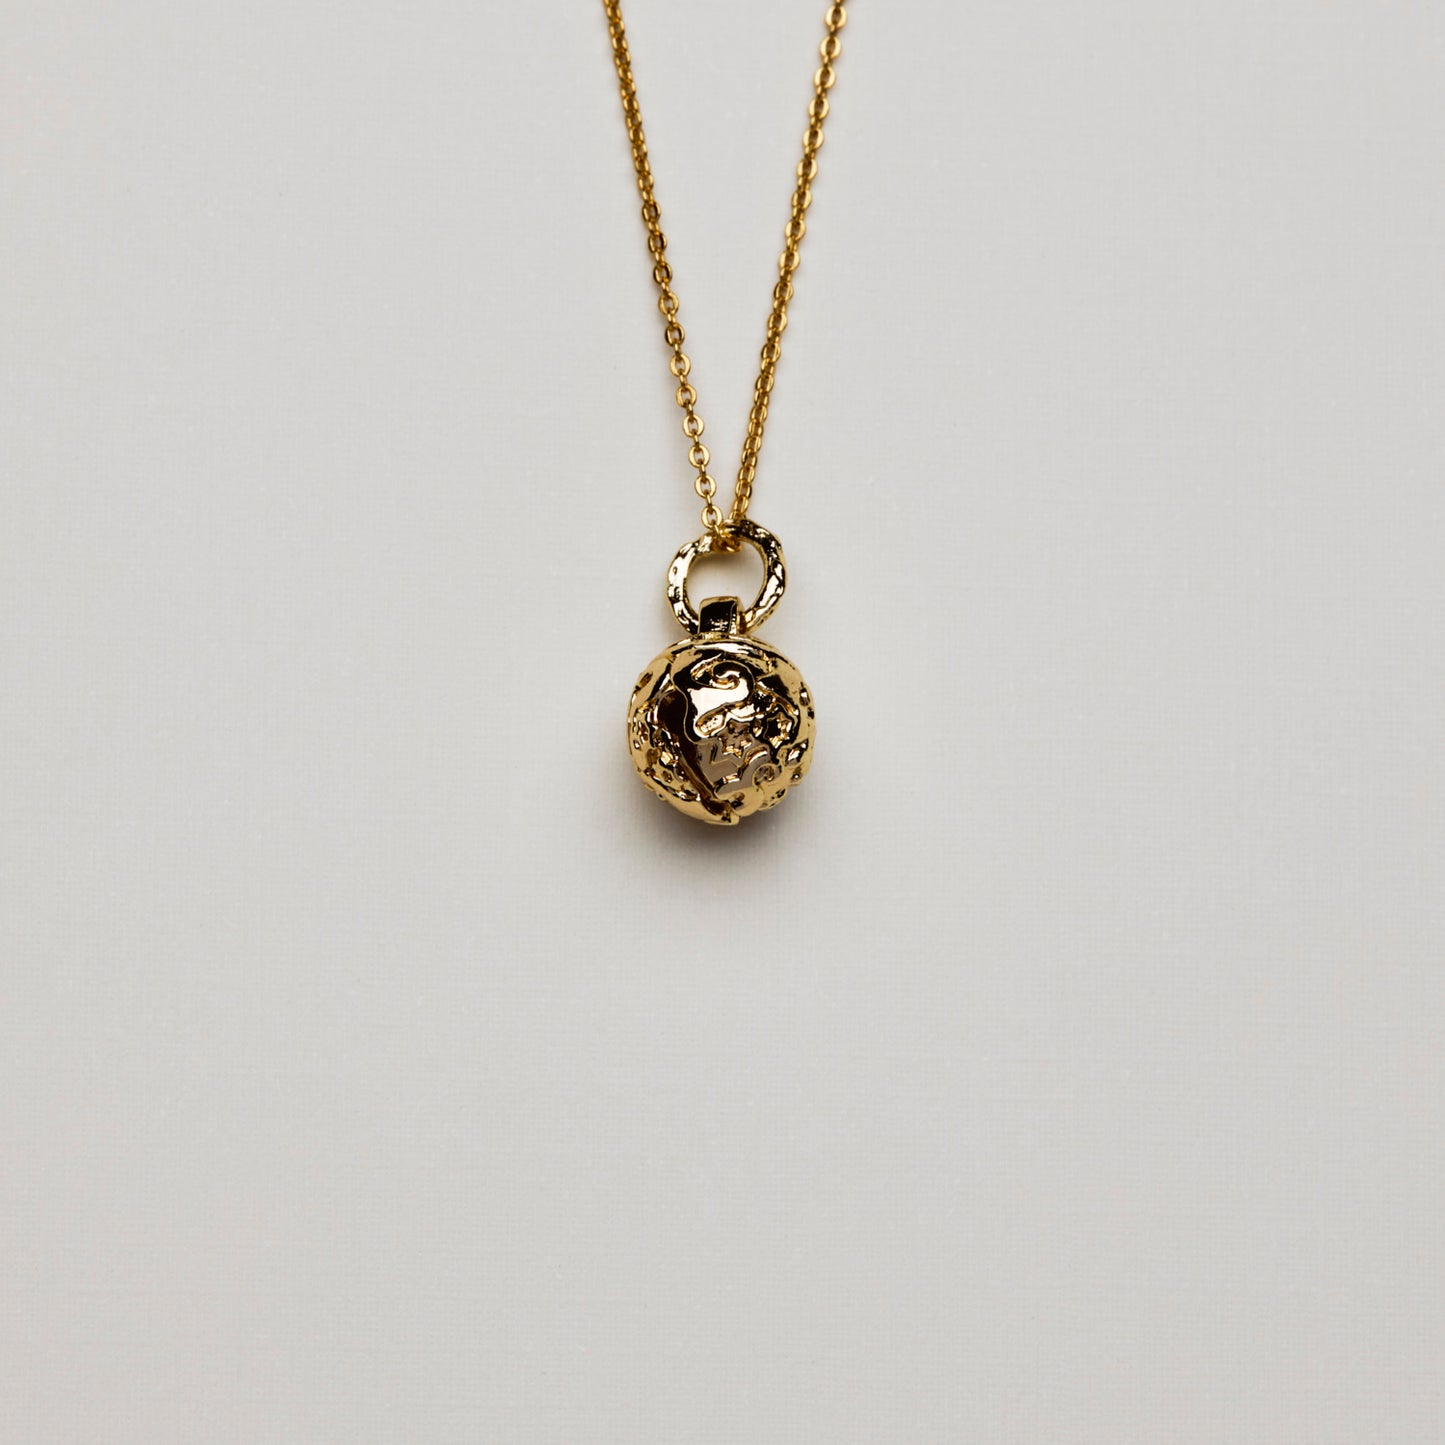 Antique Bell Necklace